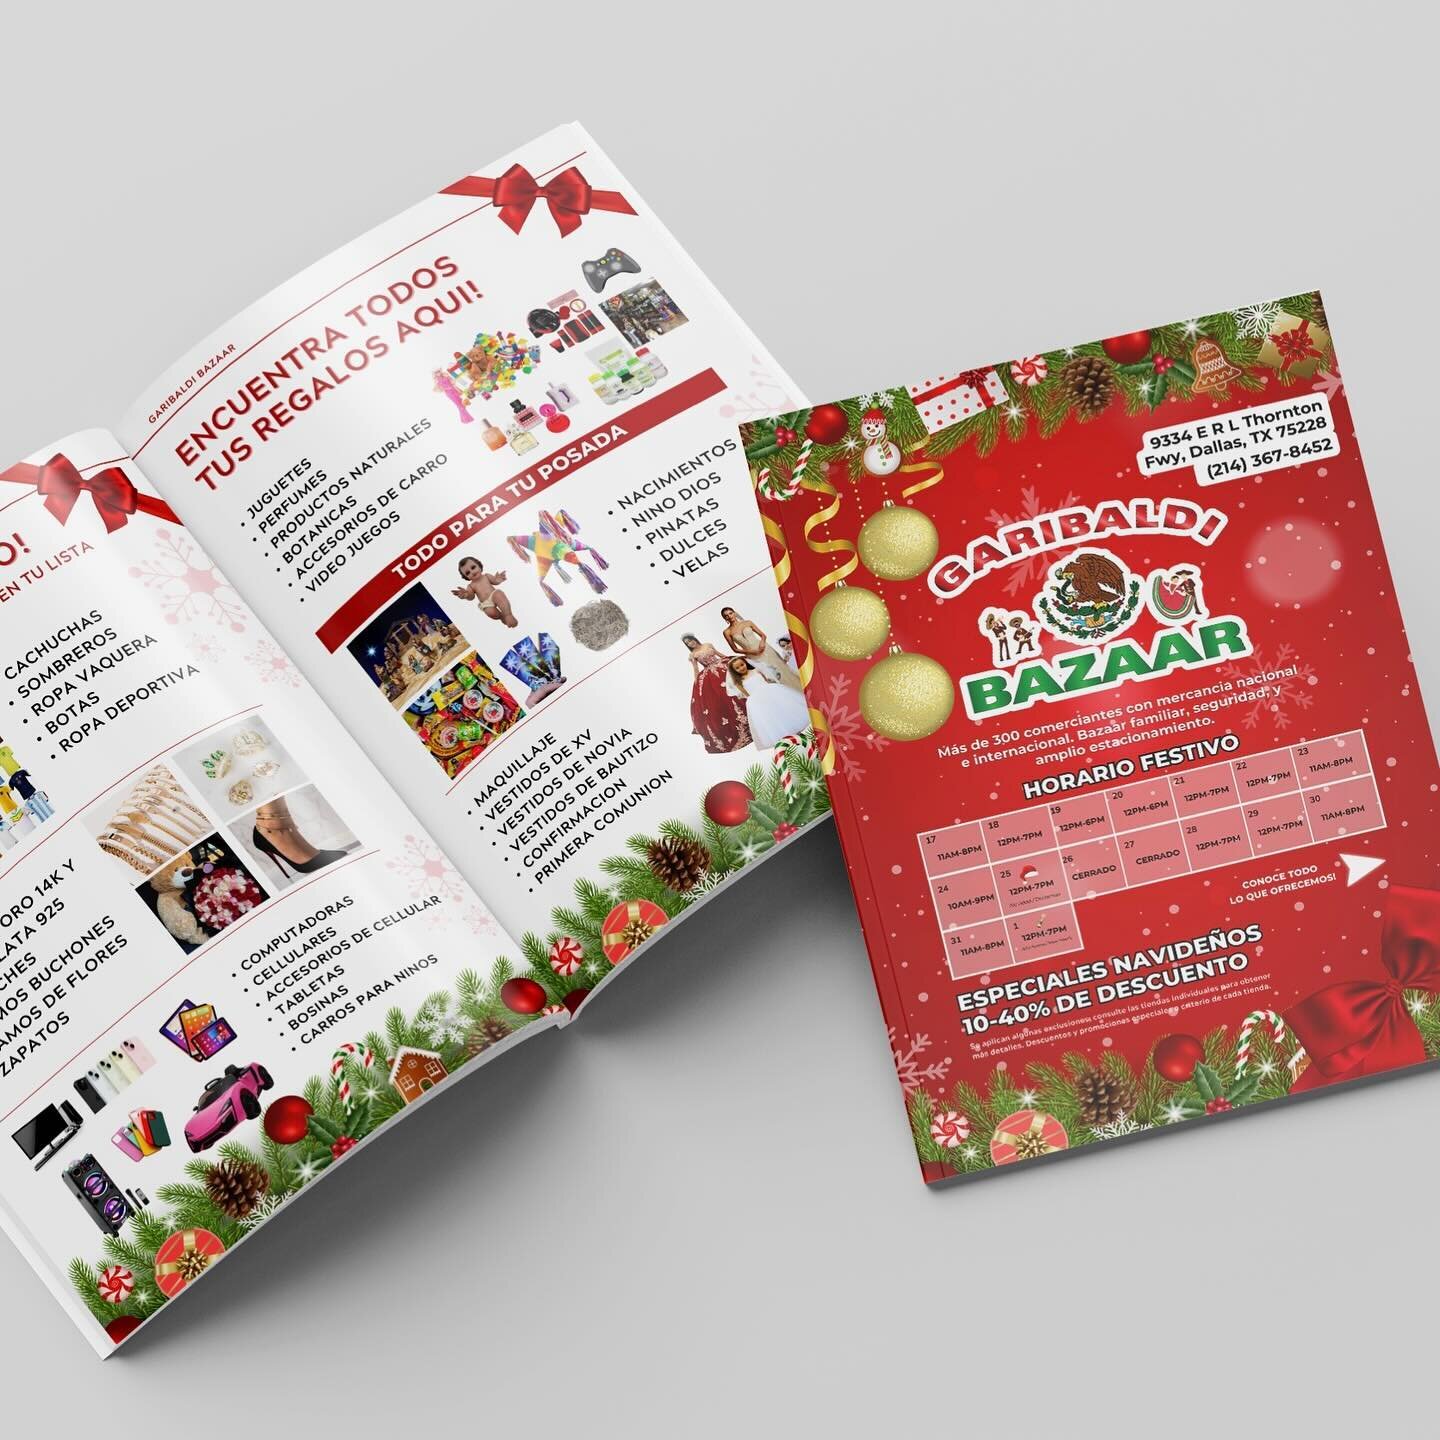 Holiday Catalog Design for @garibaldibazaar 🎁🎅🏻✨

Businesses scoring seasonal promotions beyond social media aren&rsquo;t just boosting sales &ndash; they&rsquo;re expanding their reach. Mixing things up with offline marketing tactics connects wit